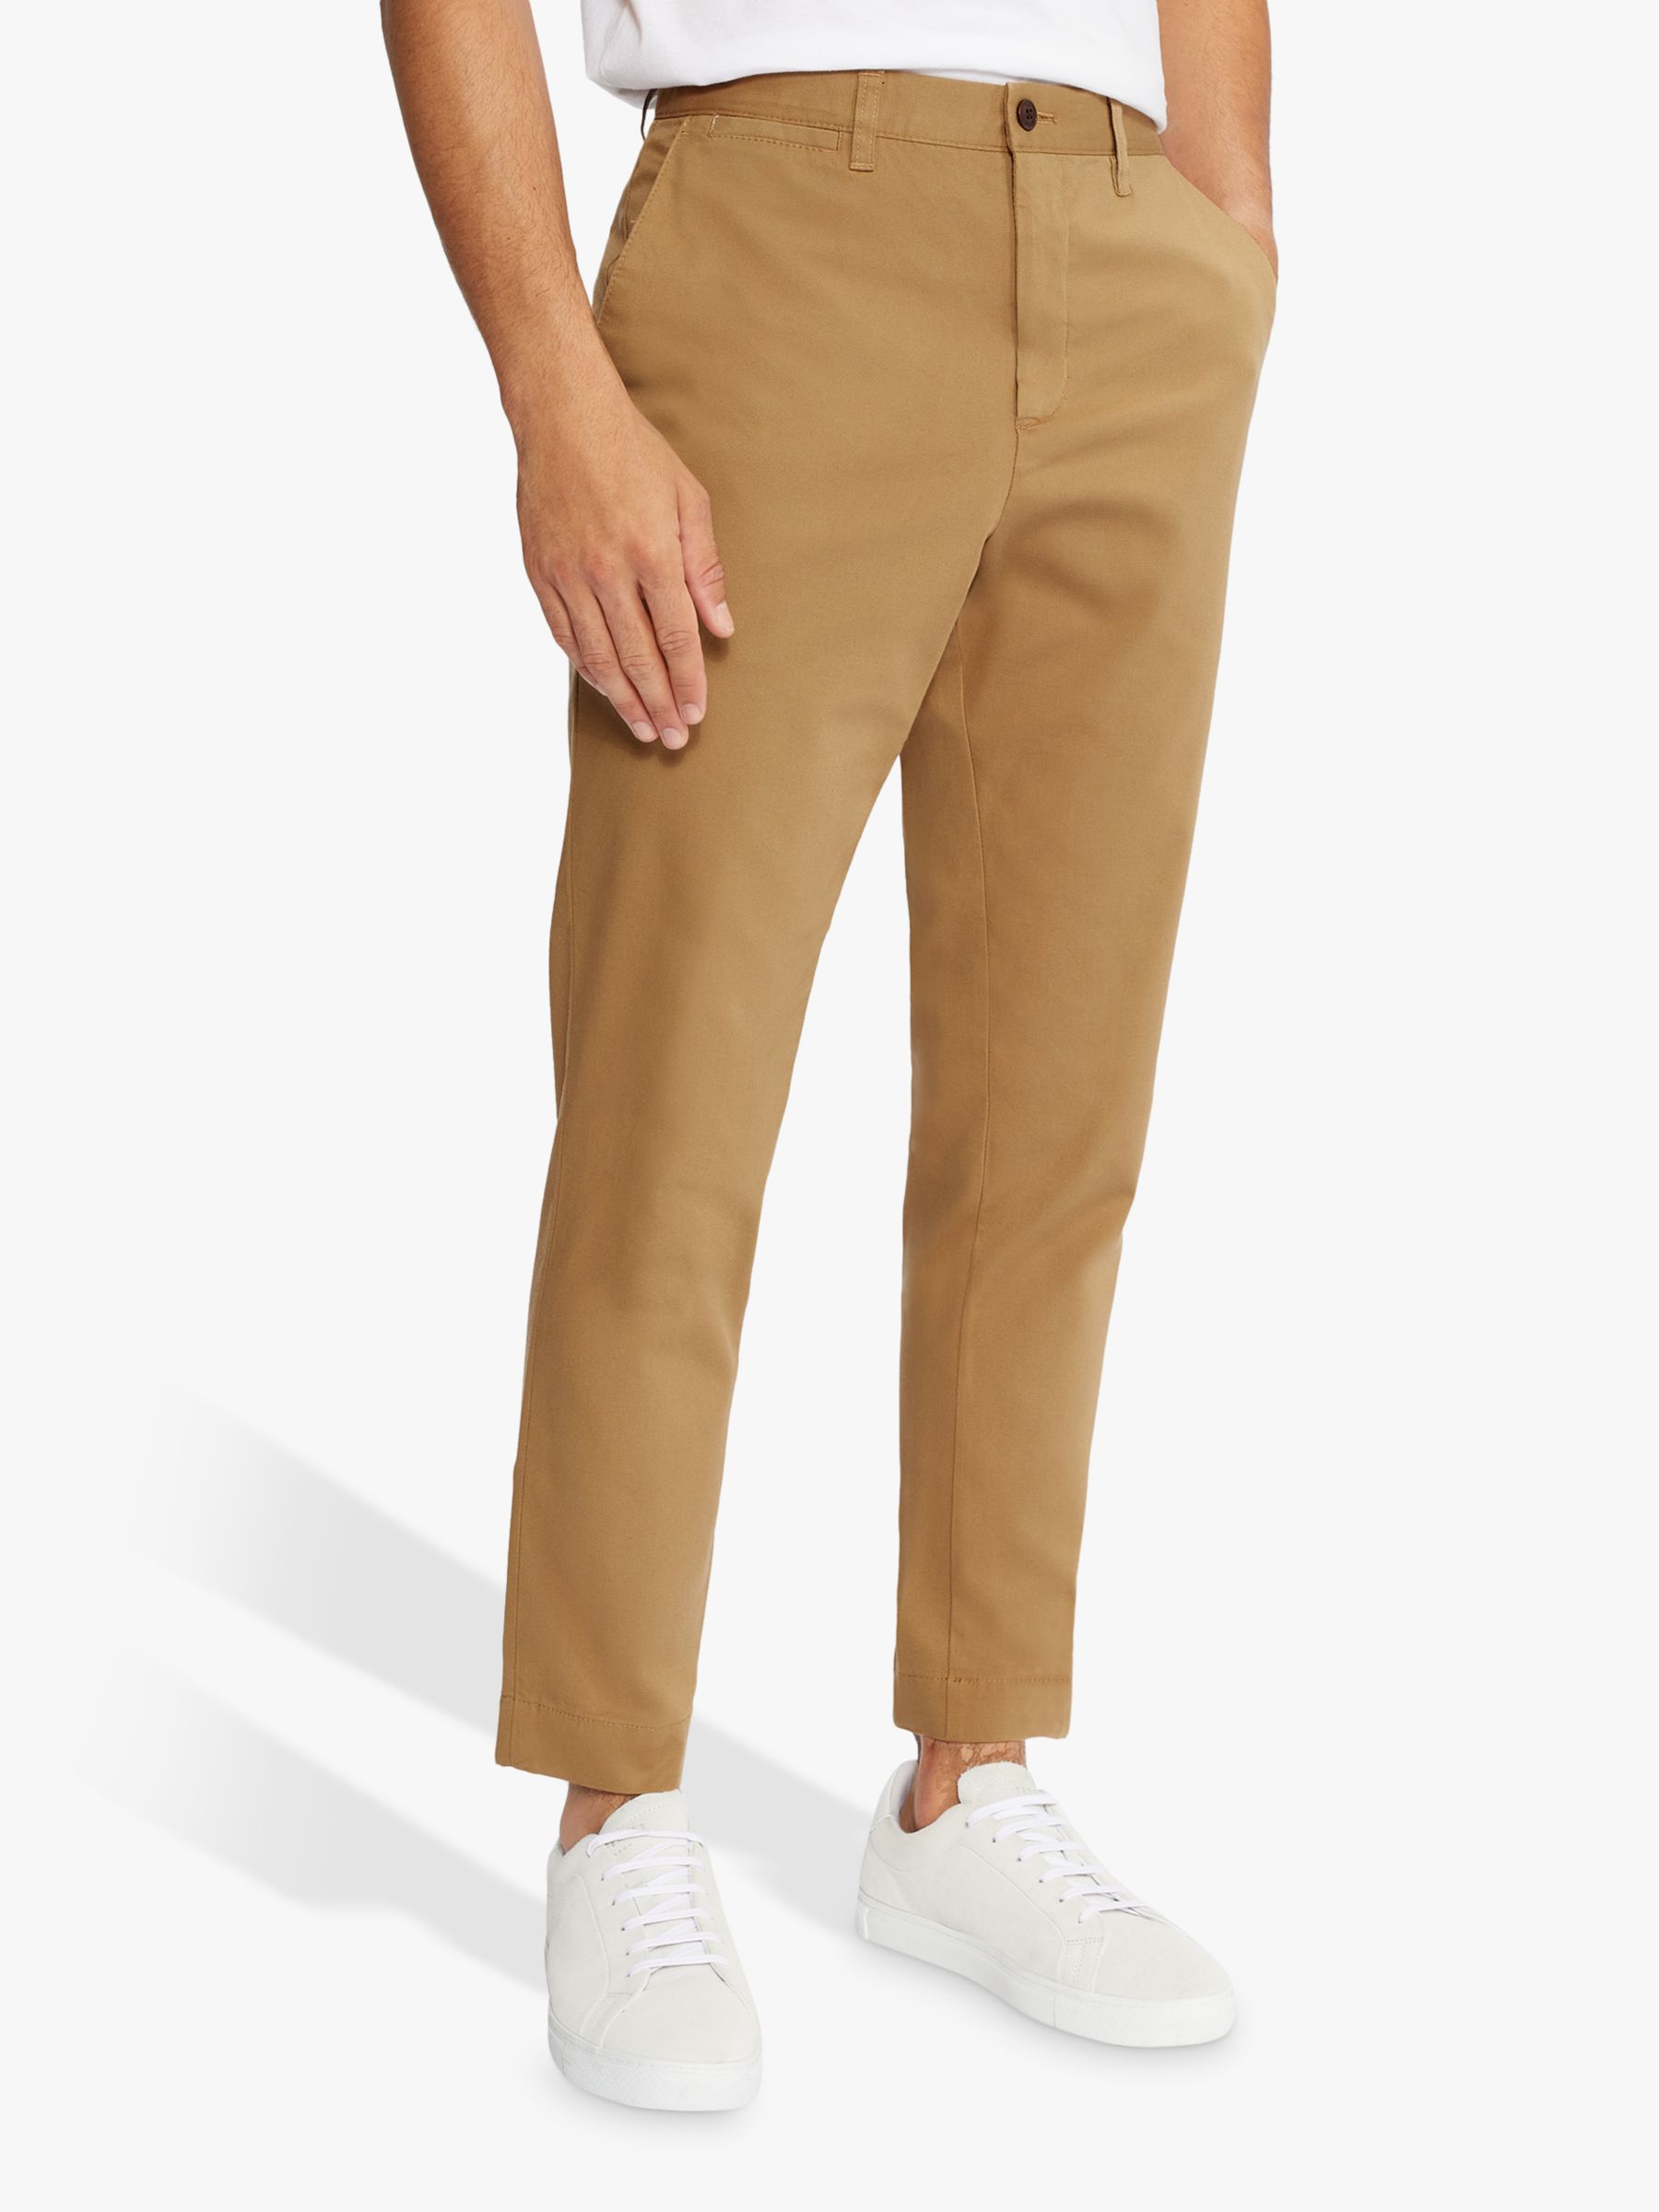 for Men Mens Clothing Trousers Natural Slacks and Chinos Casual trousers and trousers Presidents Cotton Trouser in Khaki 